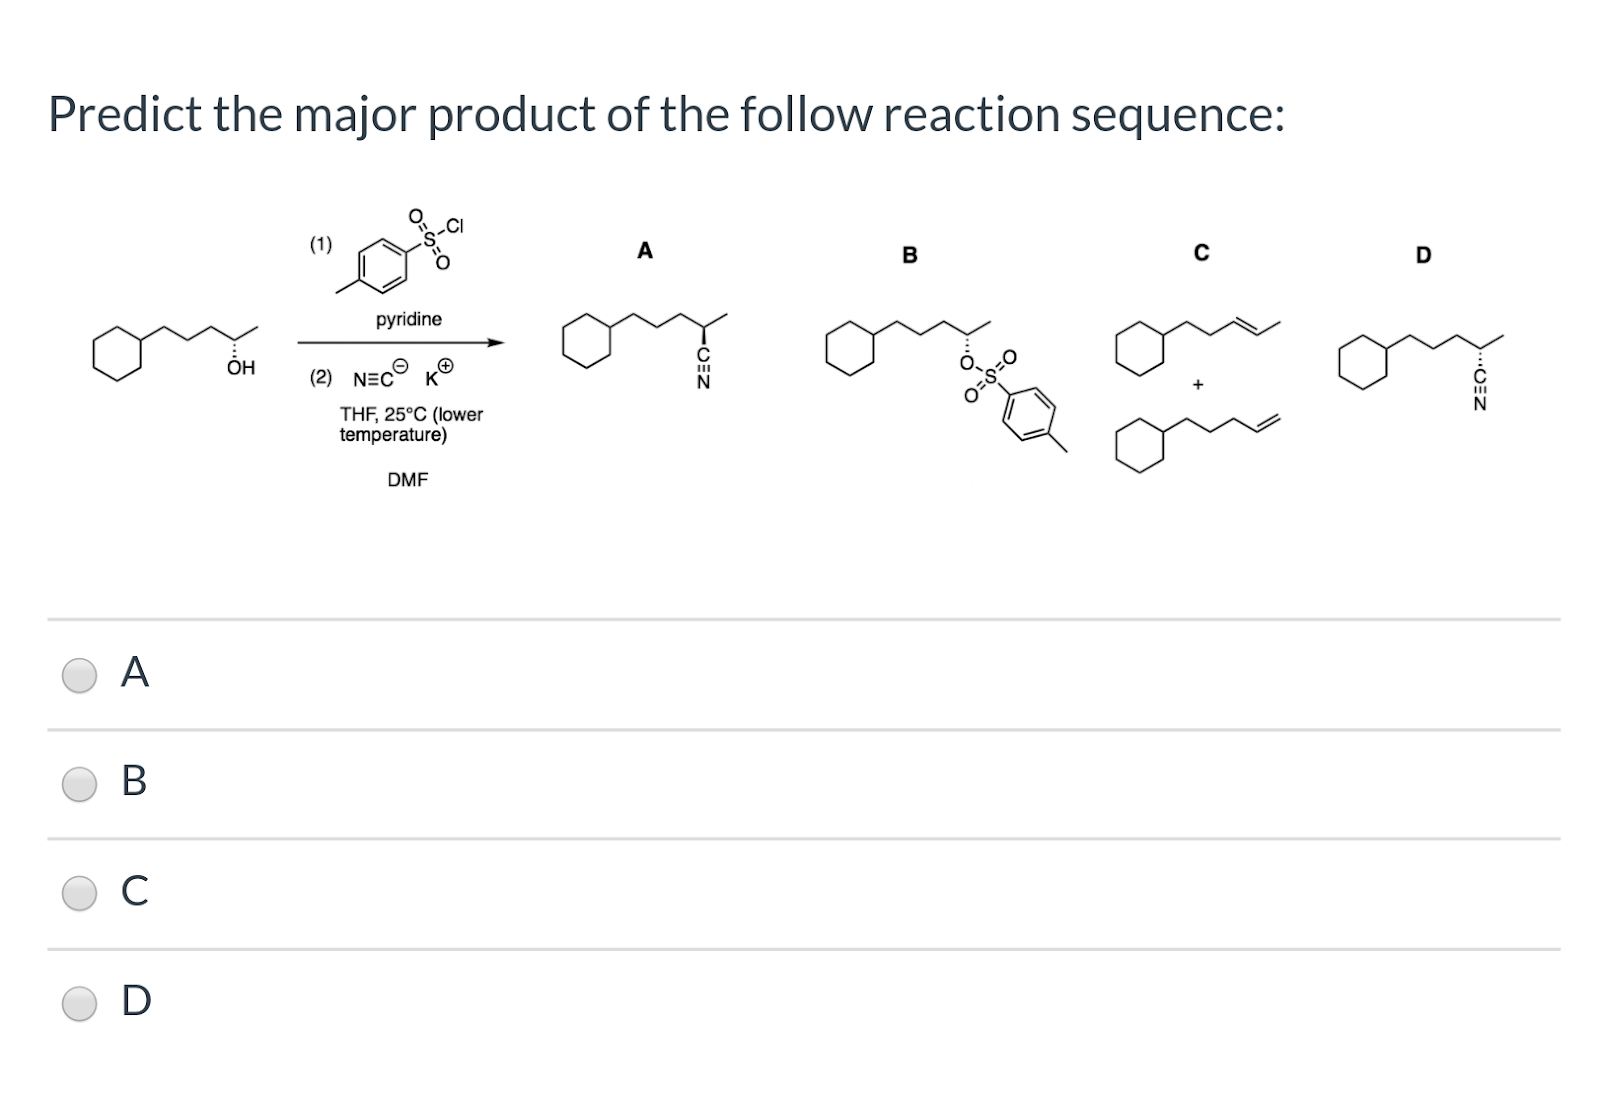 Predict the major product of the follow reaction sequence: pyridine OH (2) NECK® OZ = 2:0..( O= THF, 25°C (lower temperature)